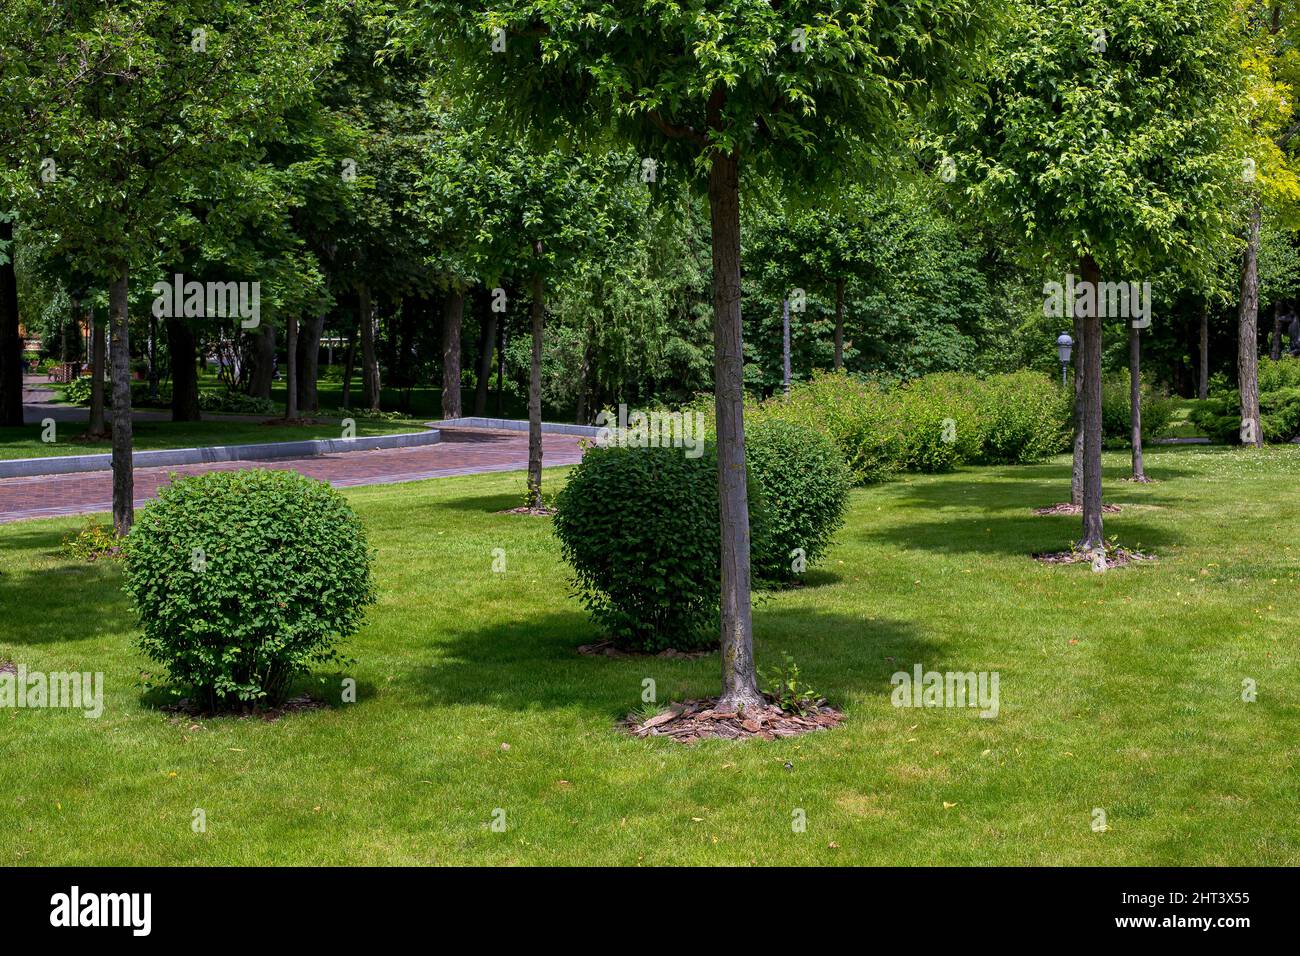 a picturesque park with deciduous bushes and trees mulched with tree bark in a sunny garden with plants lit by sunlight in the background a pedestrian Stock Photo